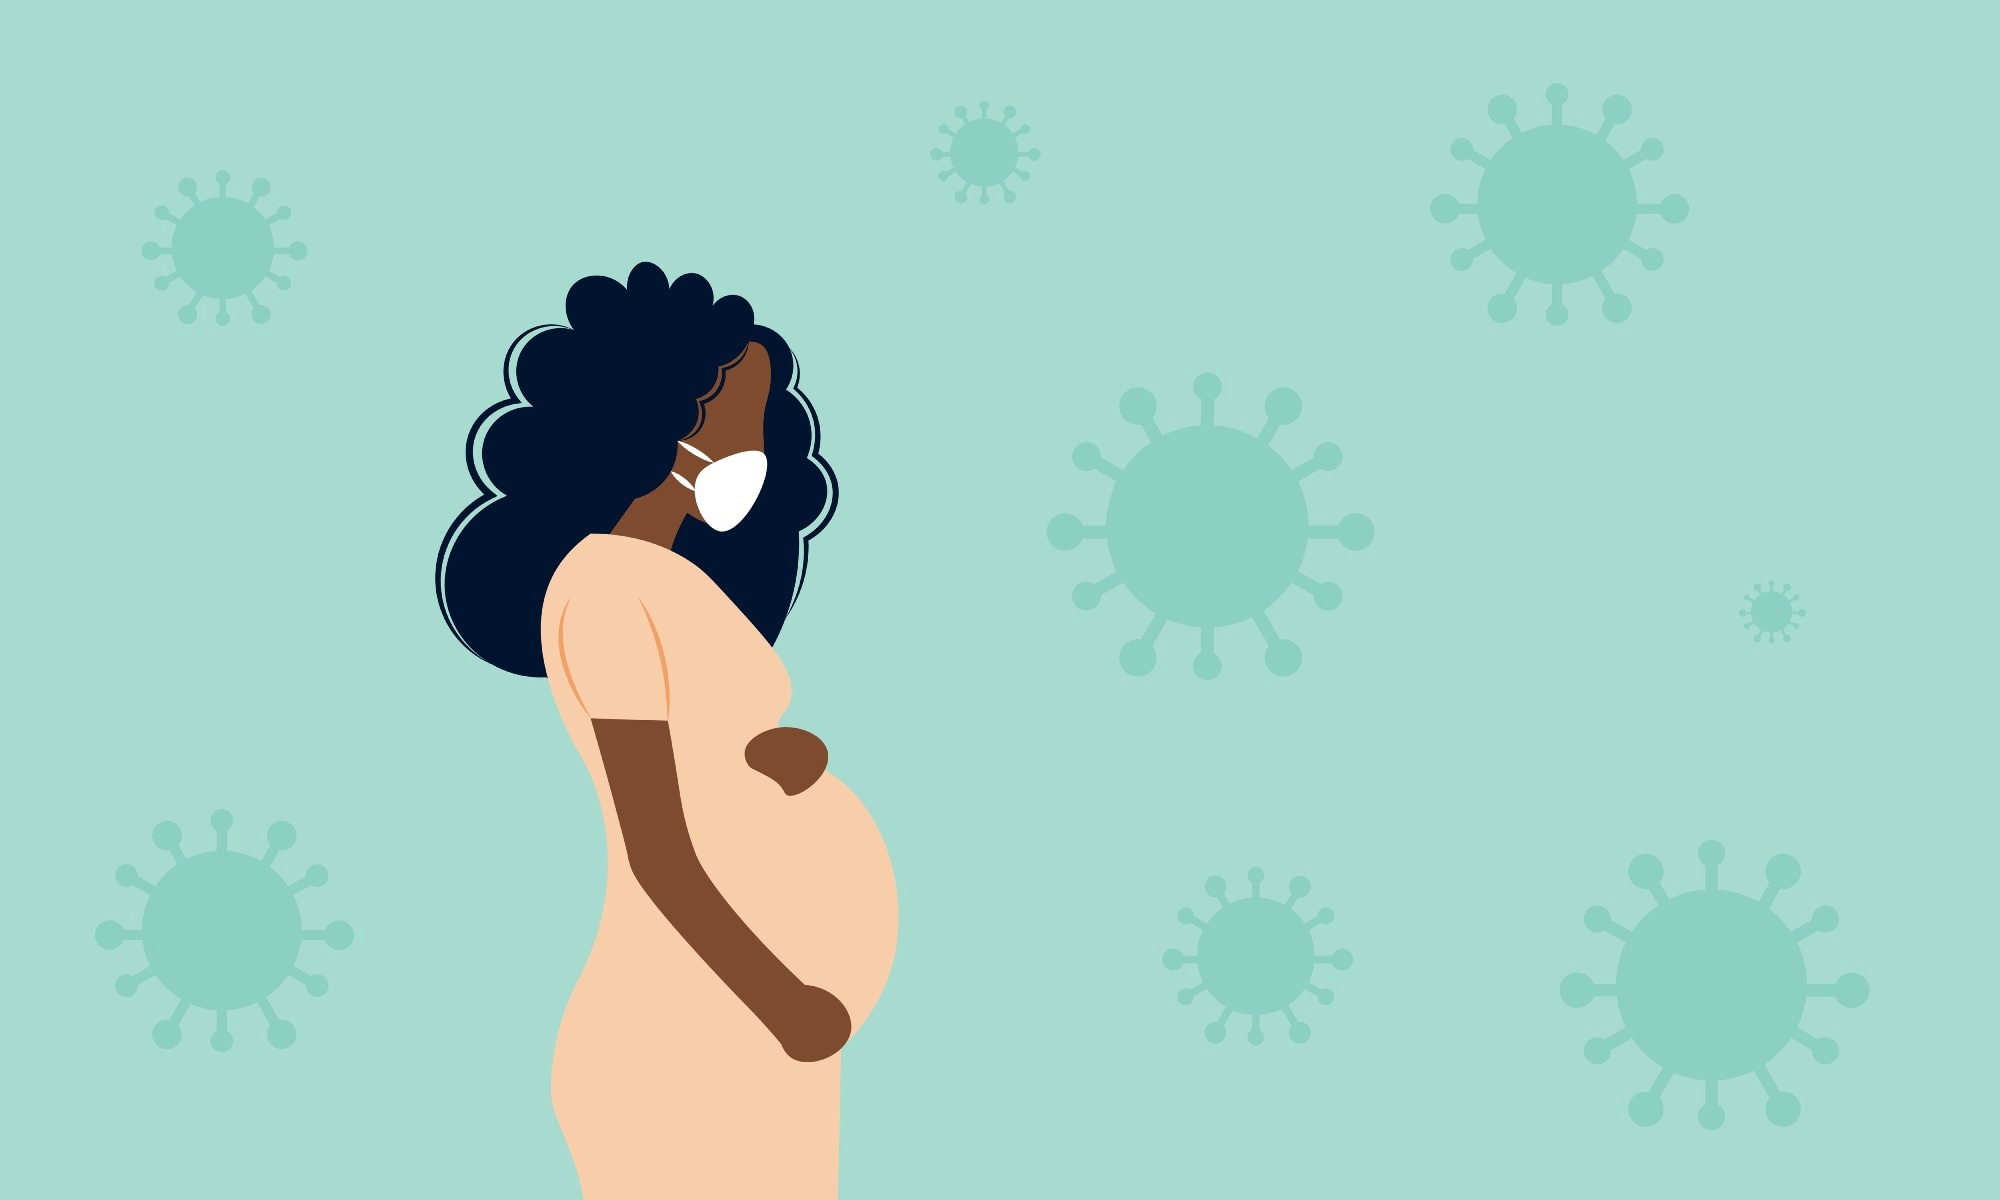 Study: Thrombocytopenia and COVID-19 infection during pregnancy increases risk of preeclampsia. A multicenter study. Image Credit: M M Vieira/Shutterstock